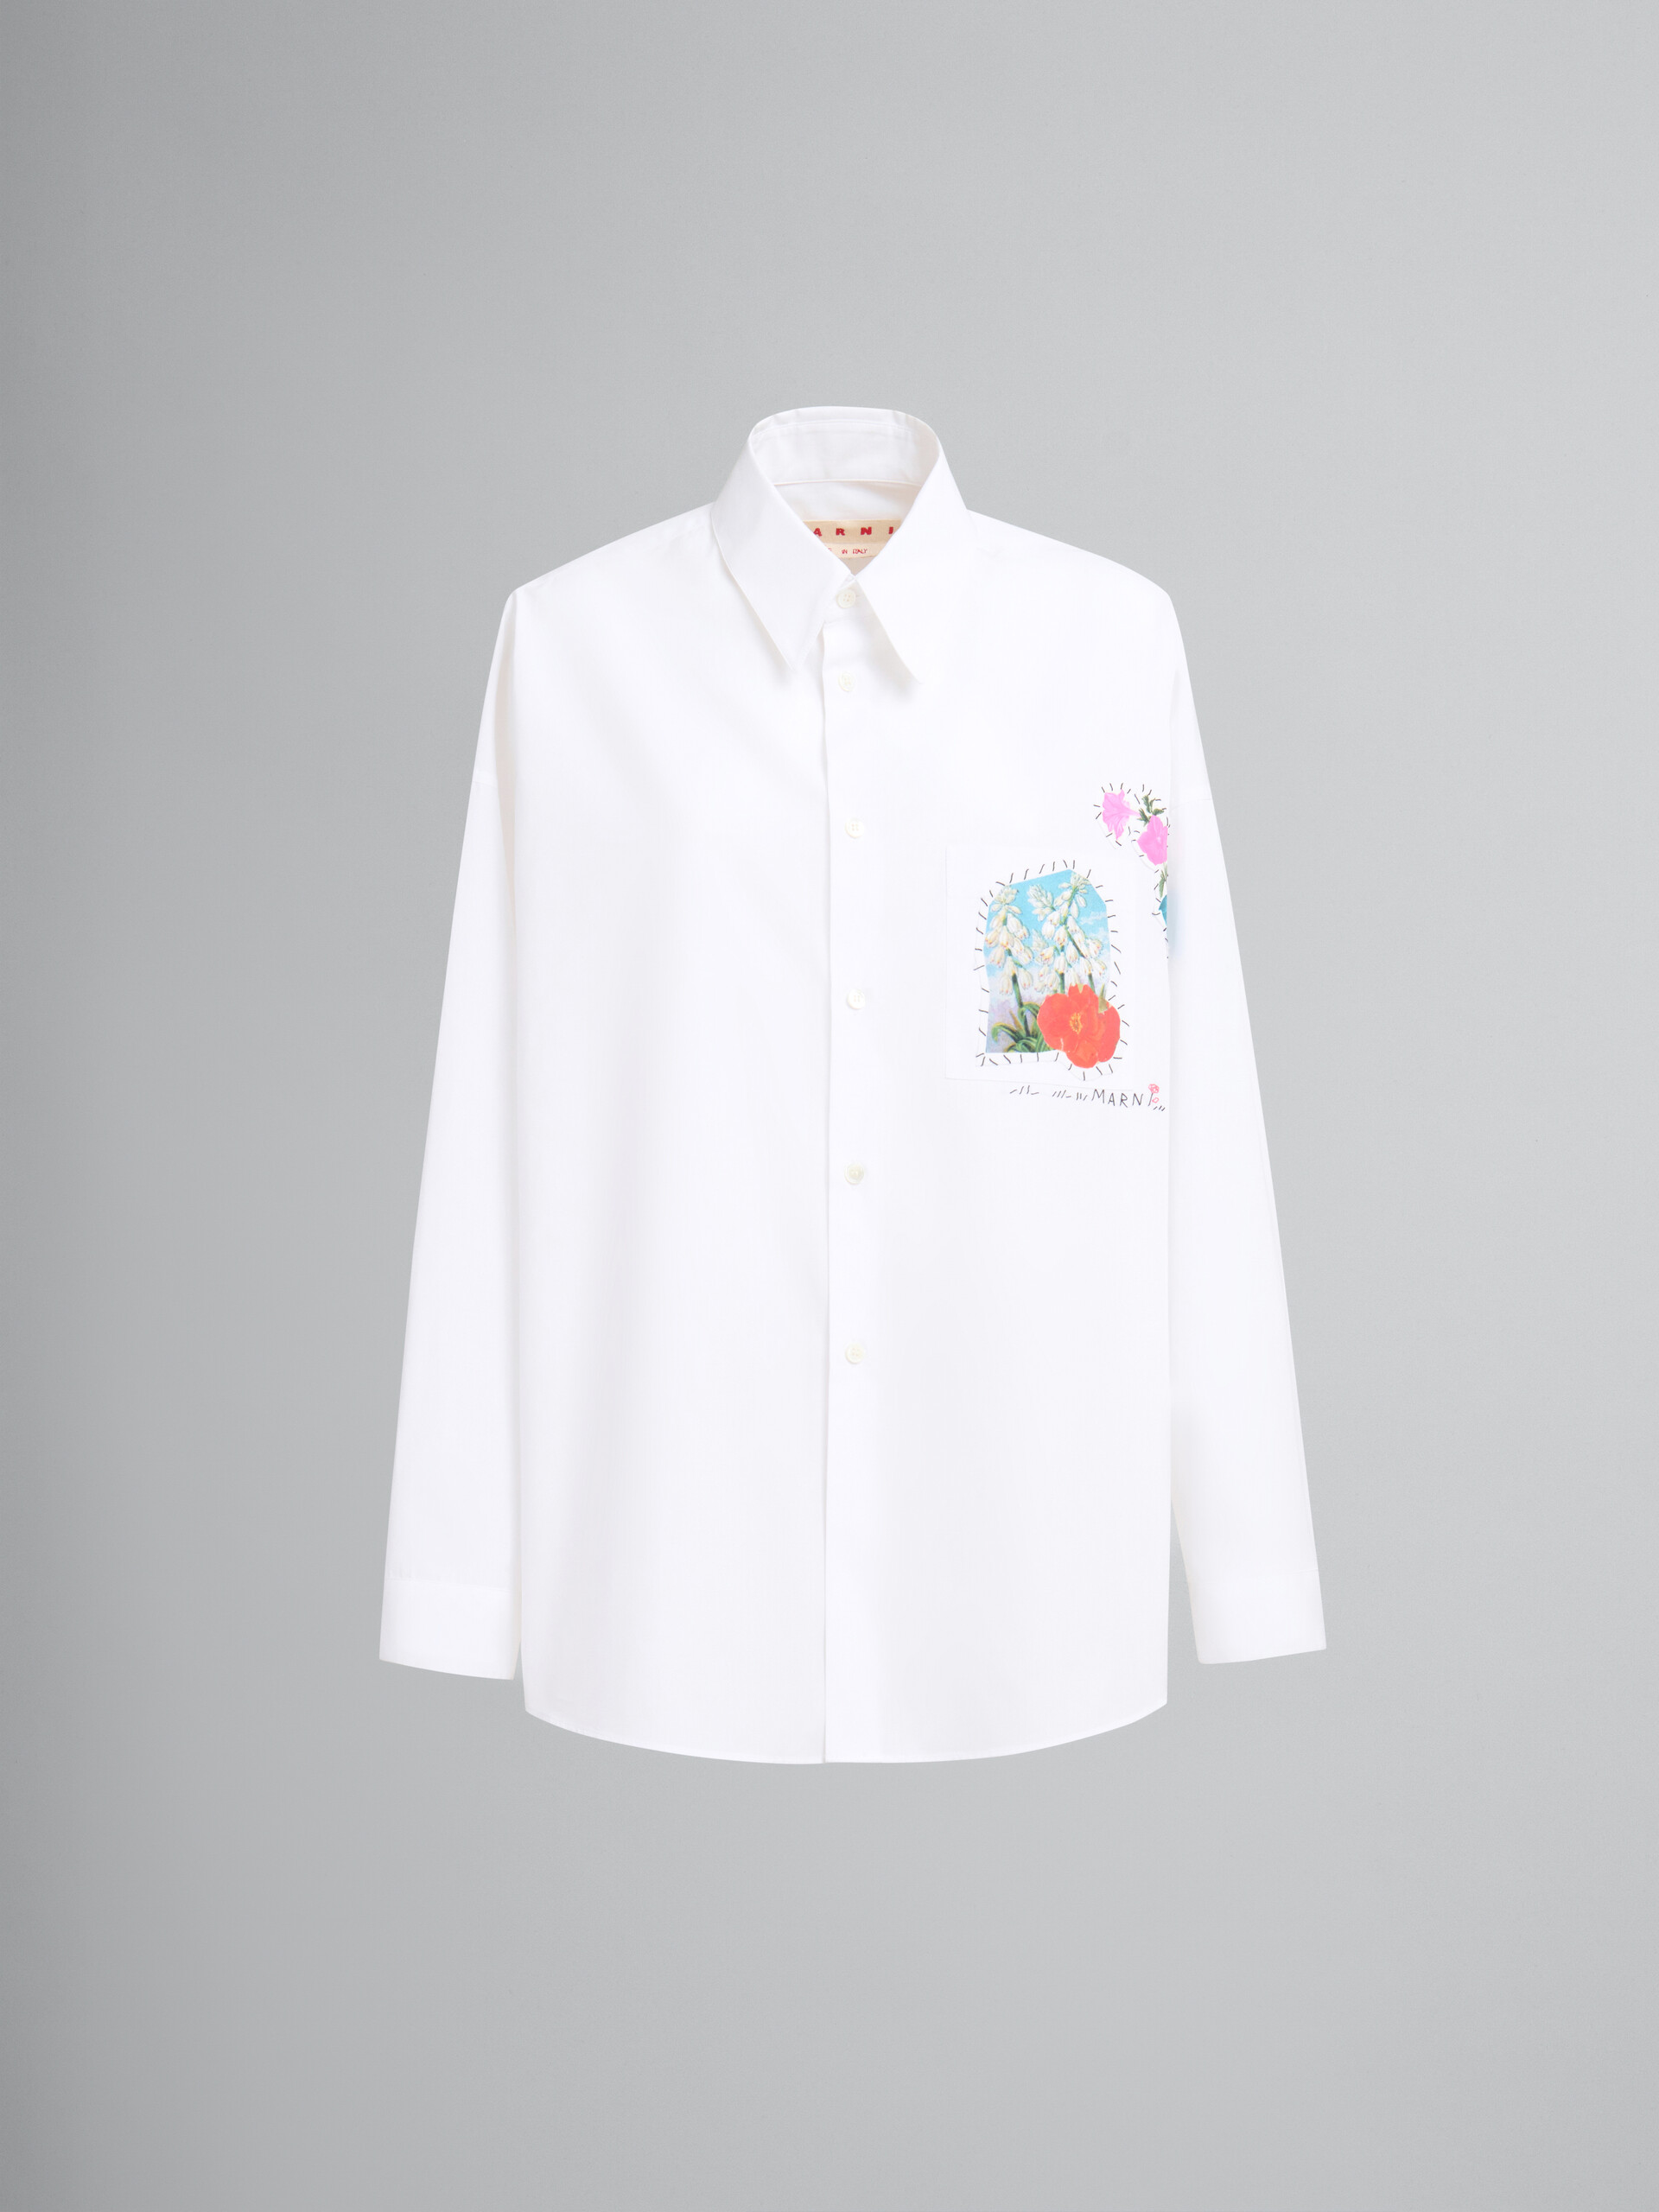 White organic poplin shirt with flower patches - Shirts - Image 1